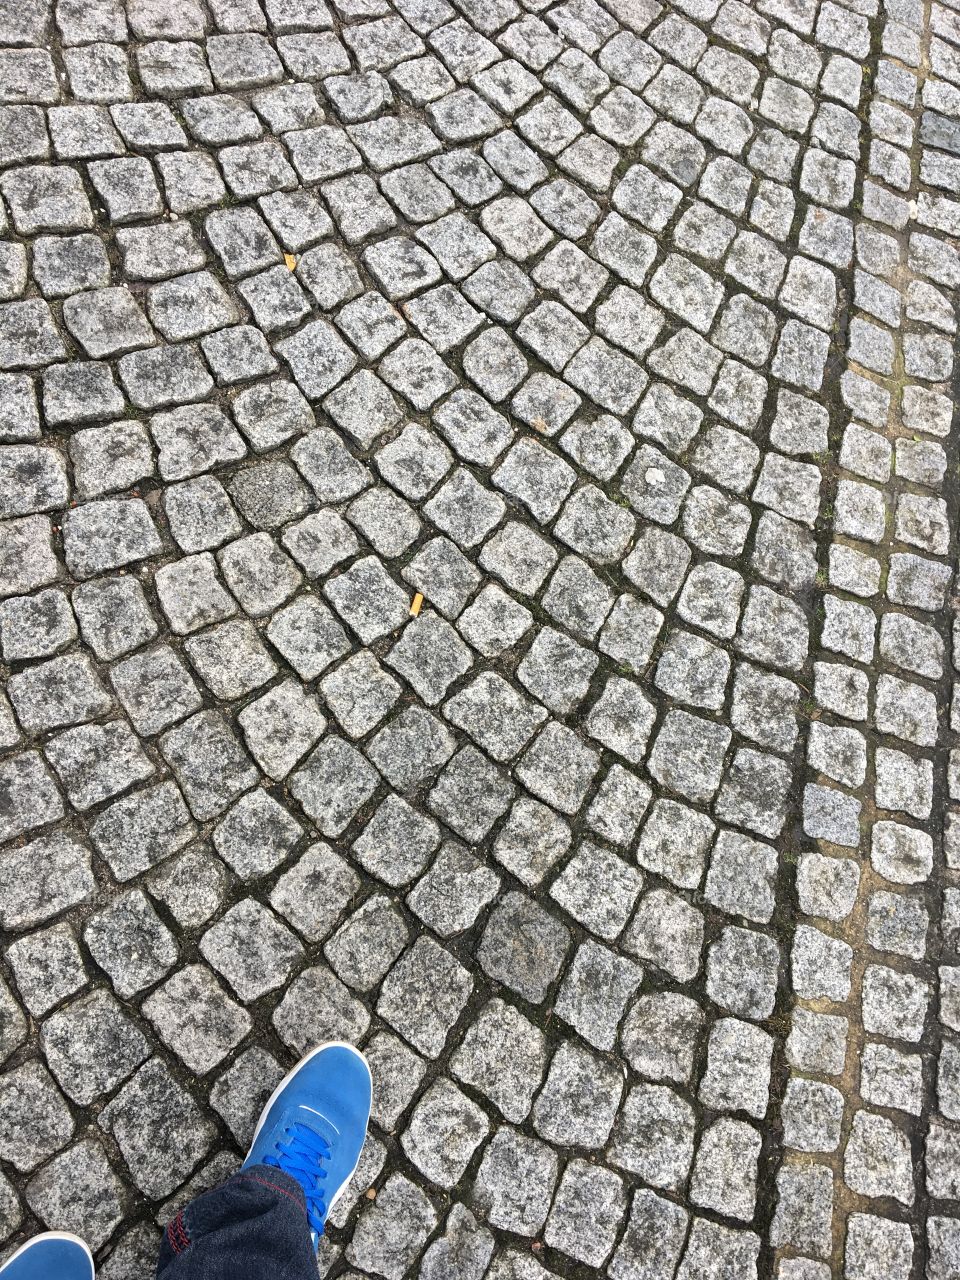 Blue shoes and stone road